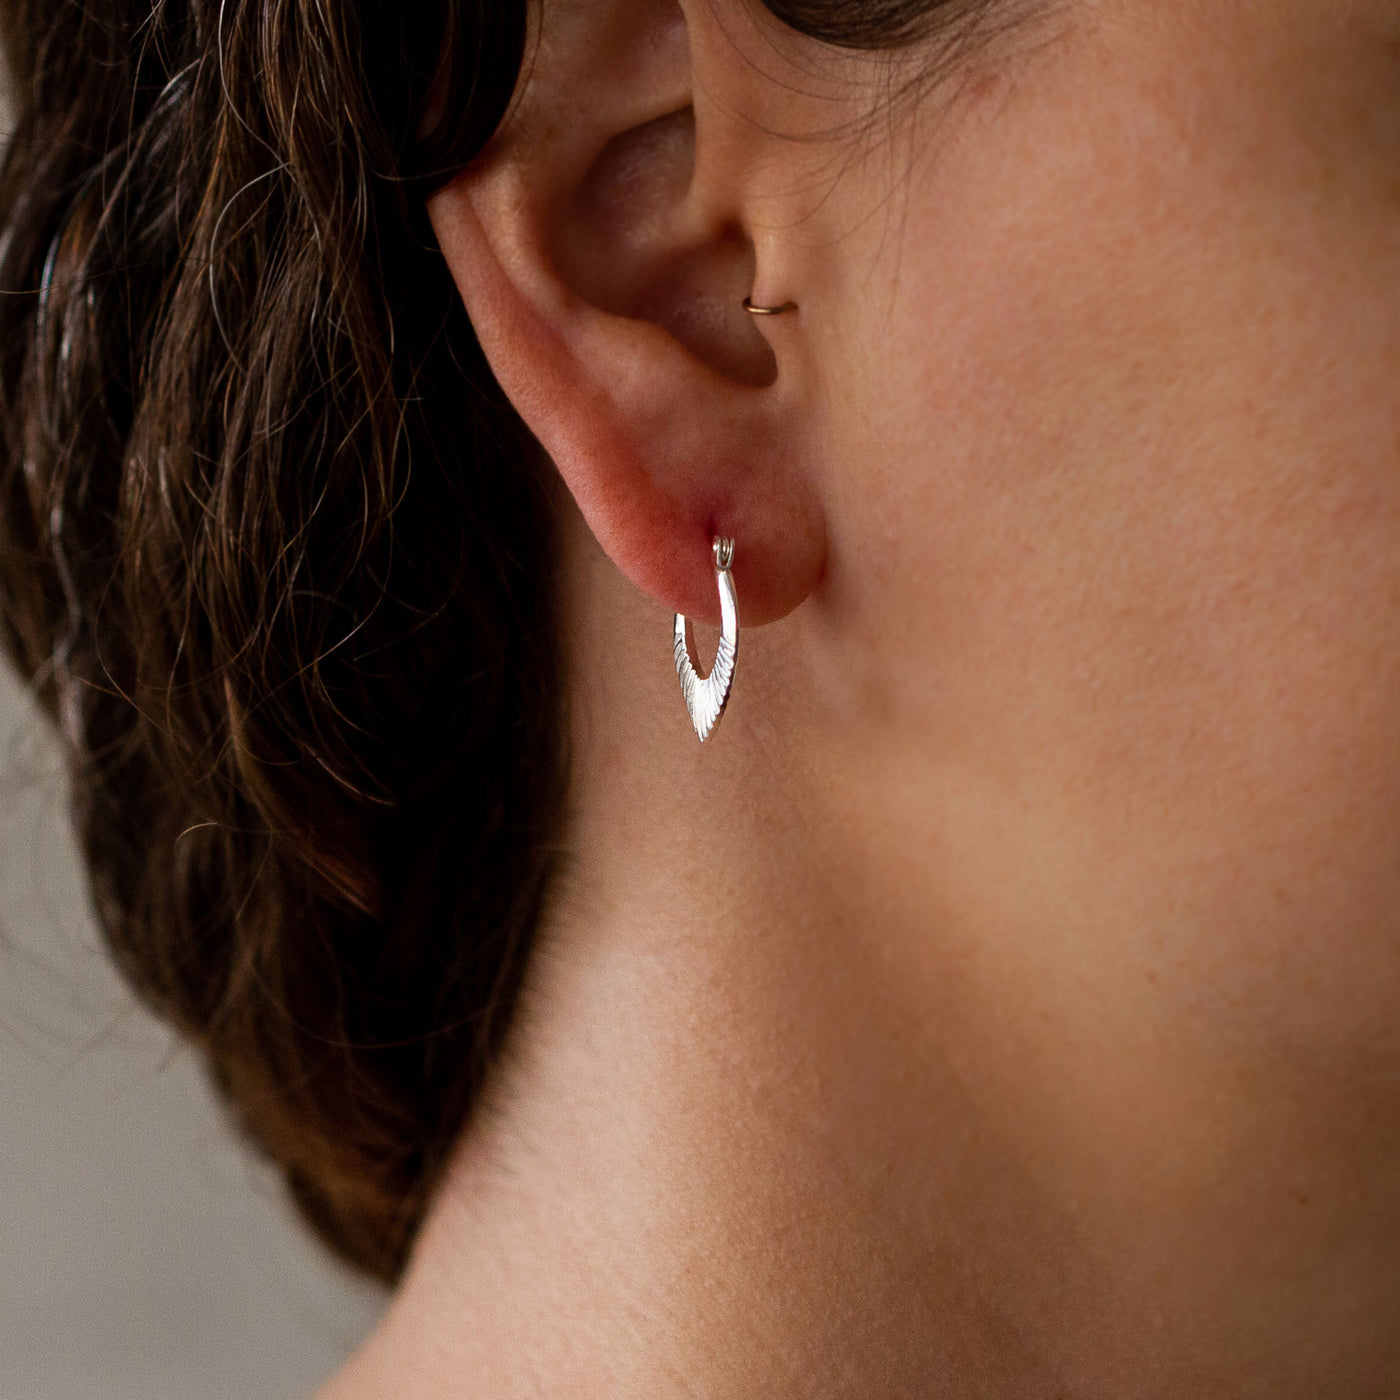 Silver Small Oblong hoops with hinge closure and sunburst bottom by Corey Egan on an ear alternate view